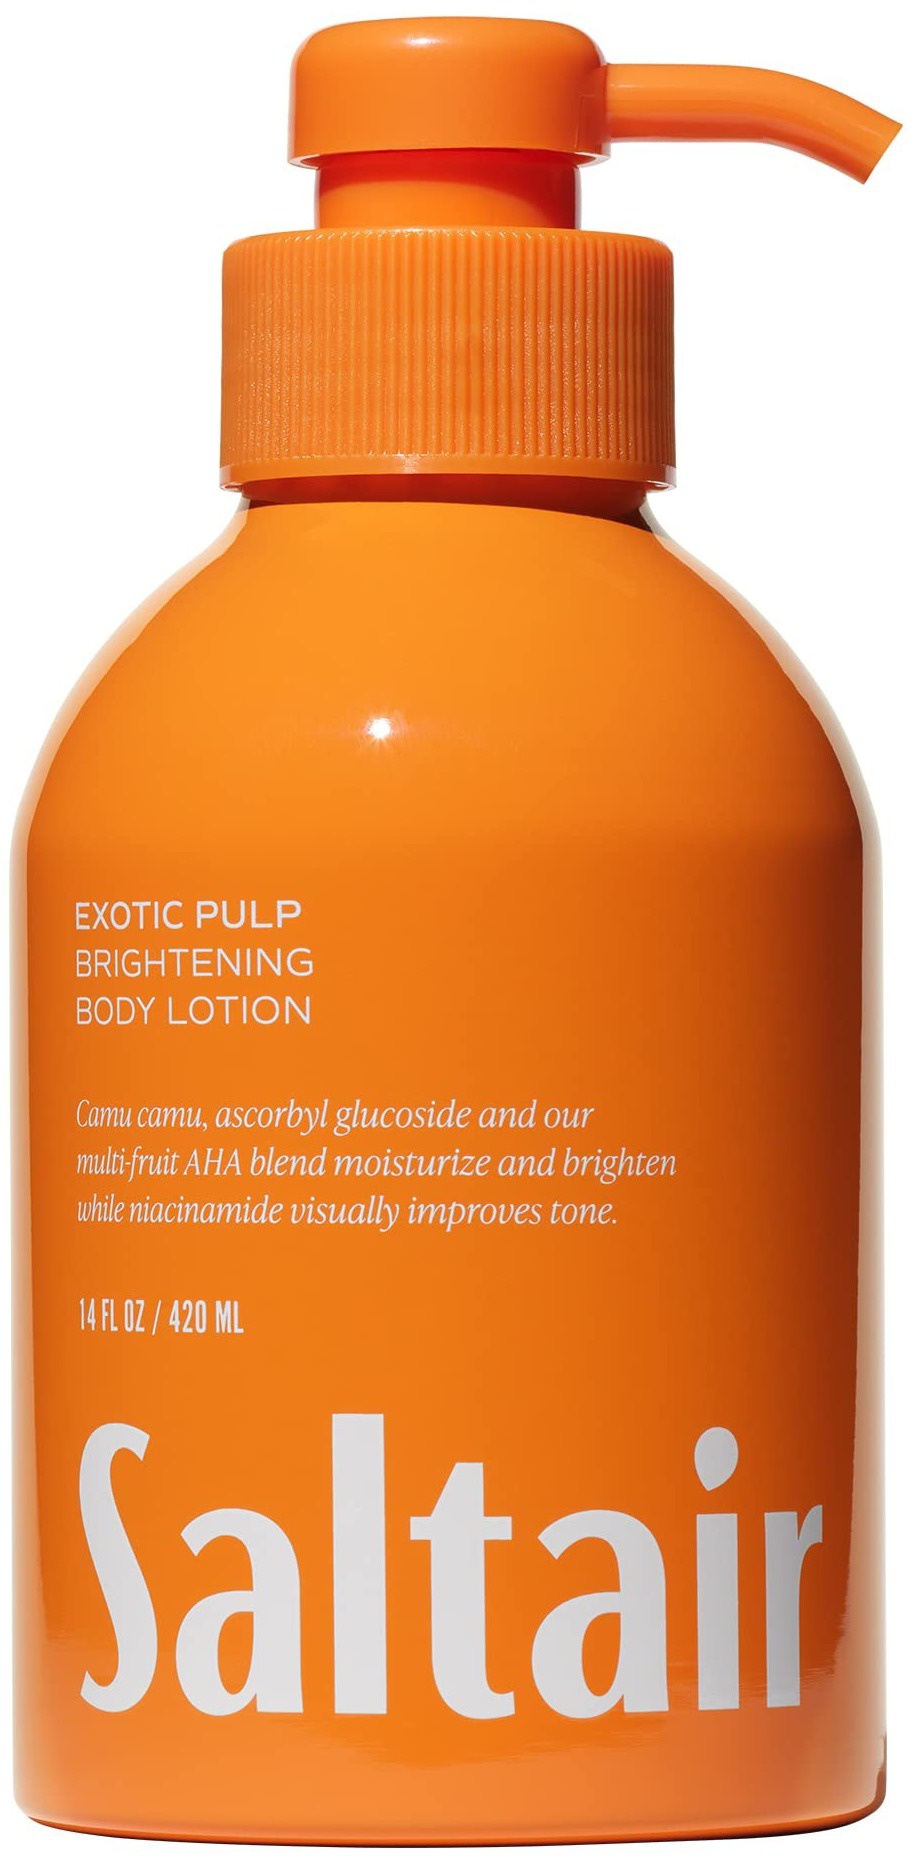 Saltair Exotic Pulp Body Lotion